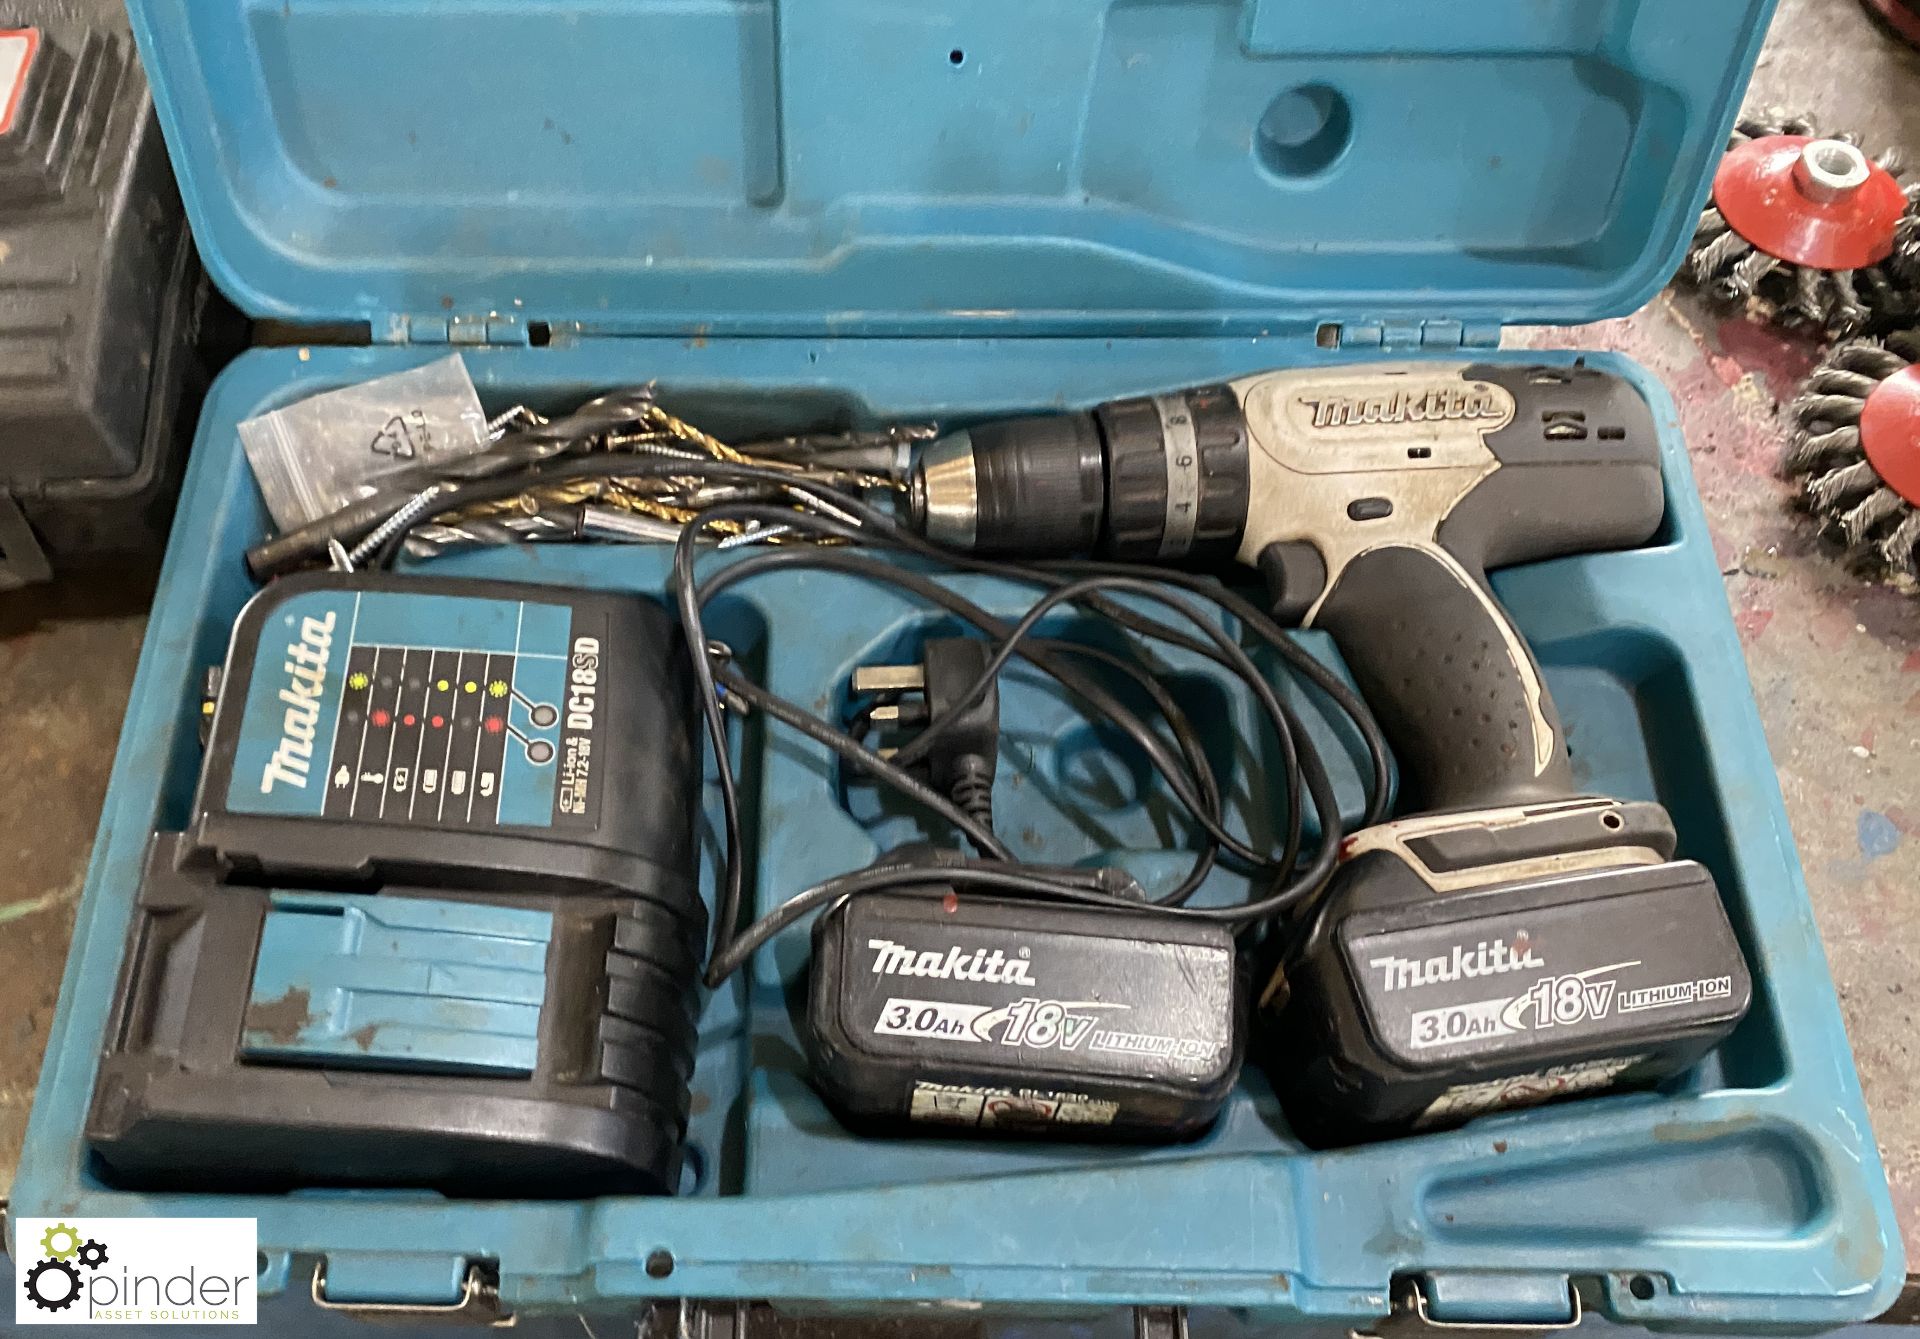 Makita 18V Rechargeable Drill, with charger, spare battery and case